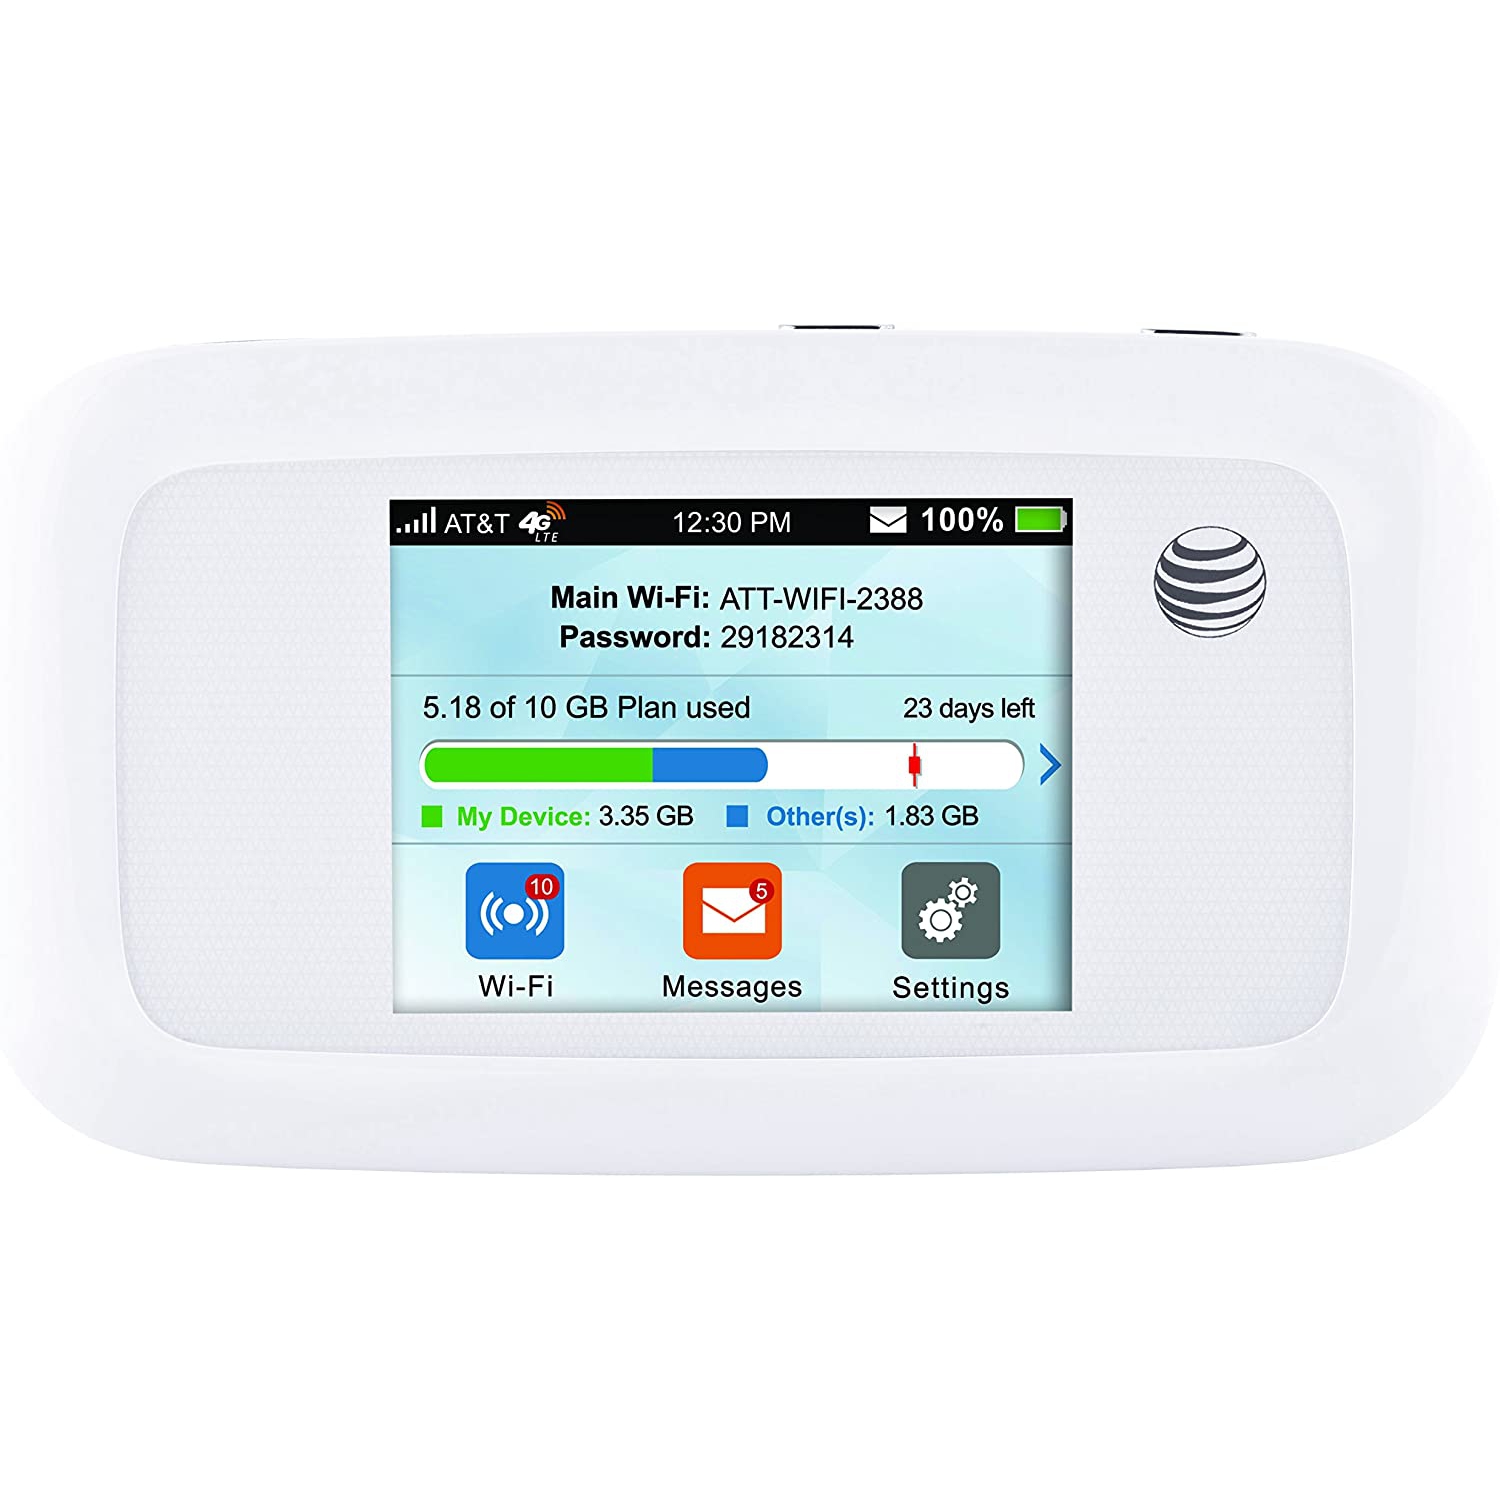 ZTE Velocity | Mobile Wifi Hotspot 4G LTE Router MF923 | Up to 150Mbps Download Speed | WiFi Connect Up to 10 Devices | GSM Unlocked - White (Open Box)